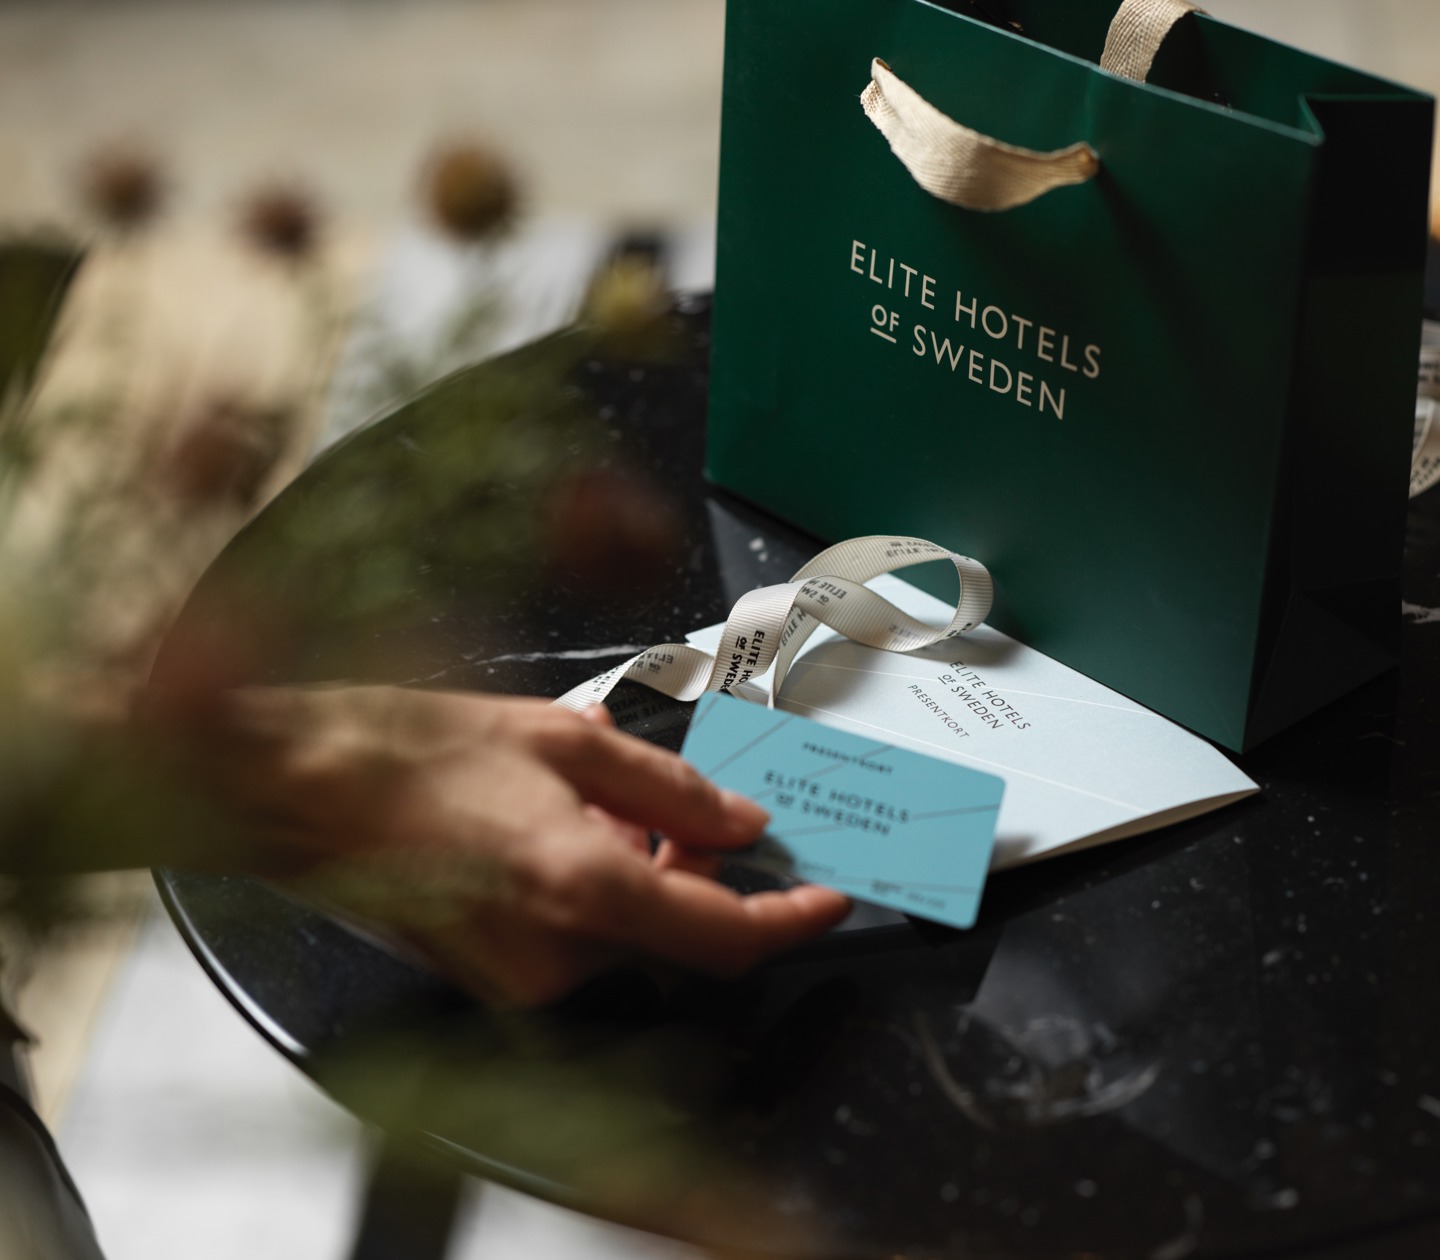 Person holding gift card from Elite hotels